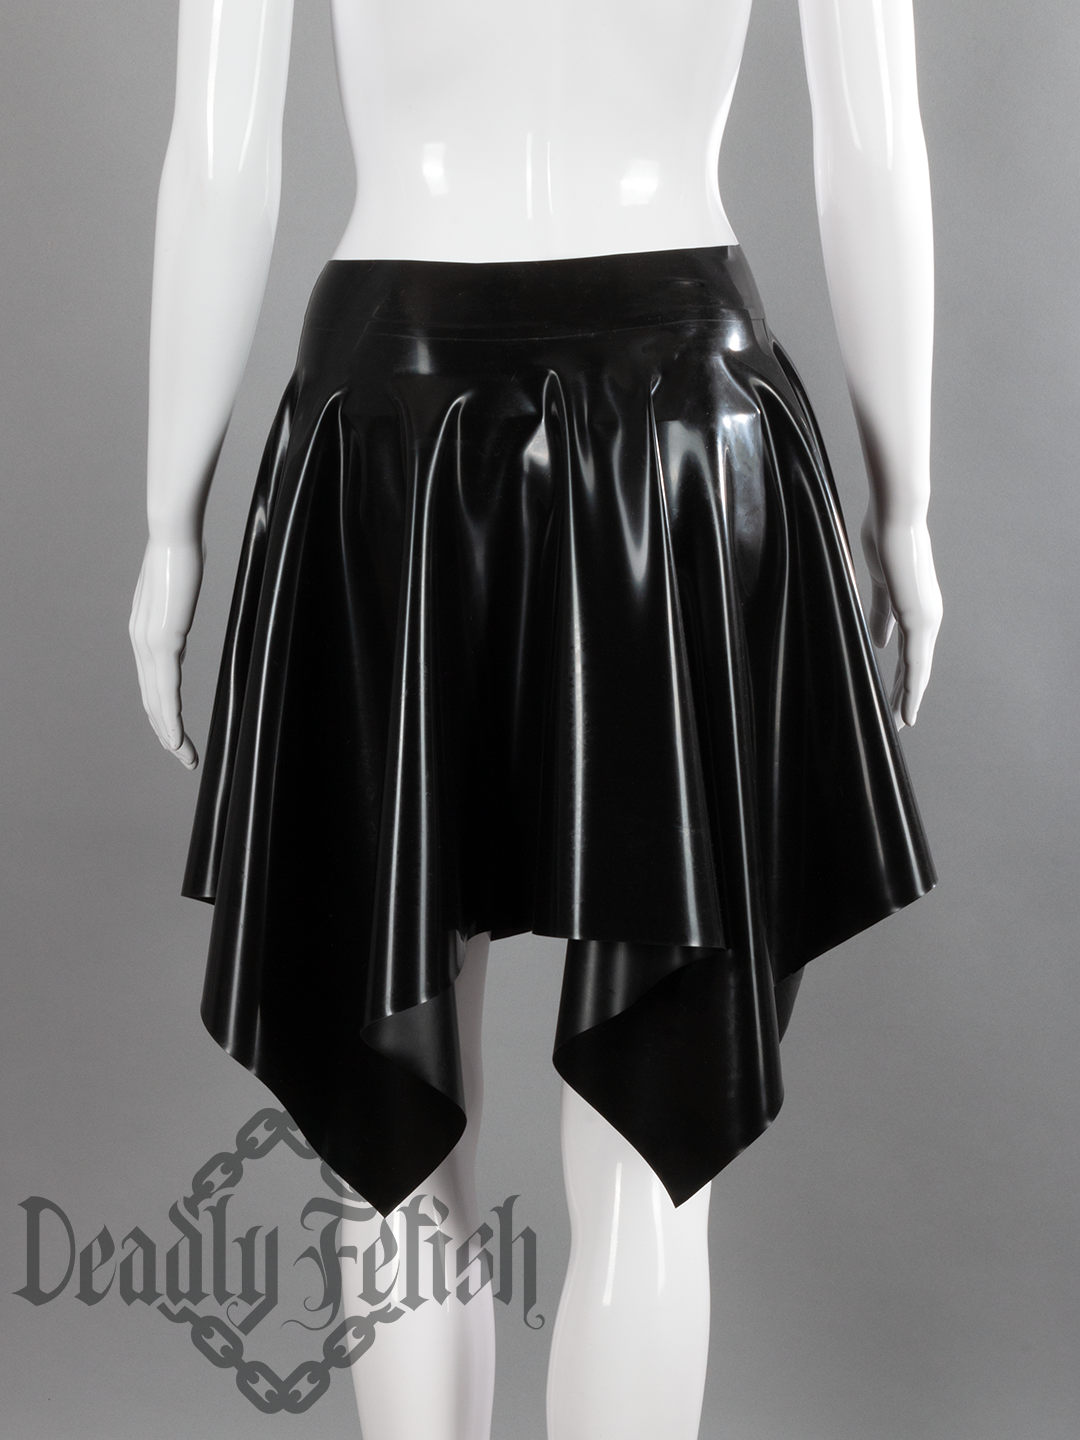 Deadly Fetish Made-To-Order Latex: Skirt #09